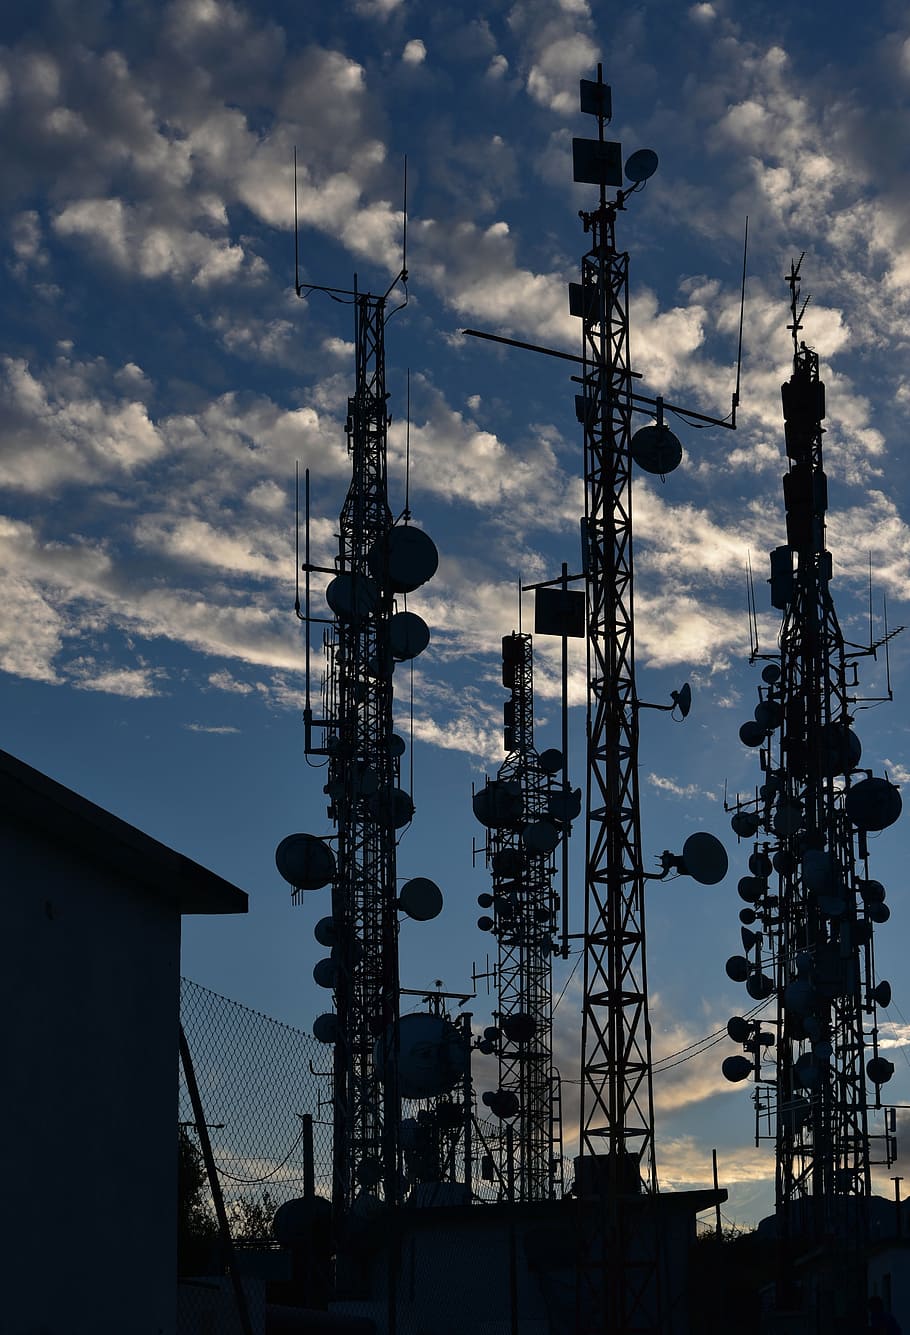 torres, communications, sky, clouds, repeater, wave, structure, antennas, backlight, technology